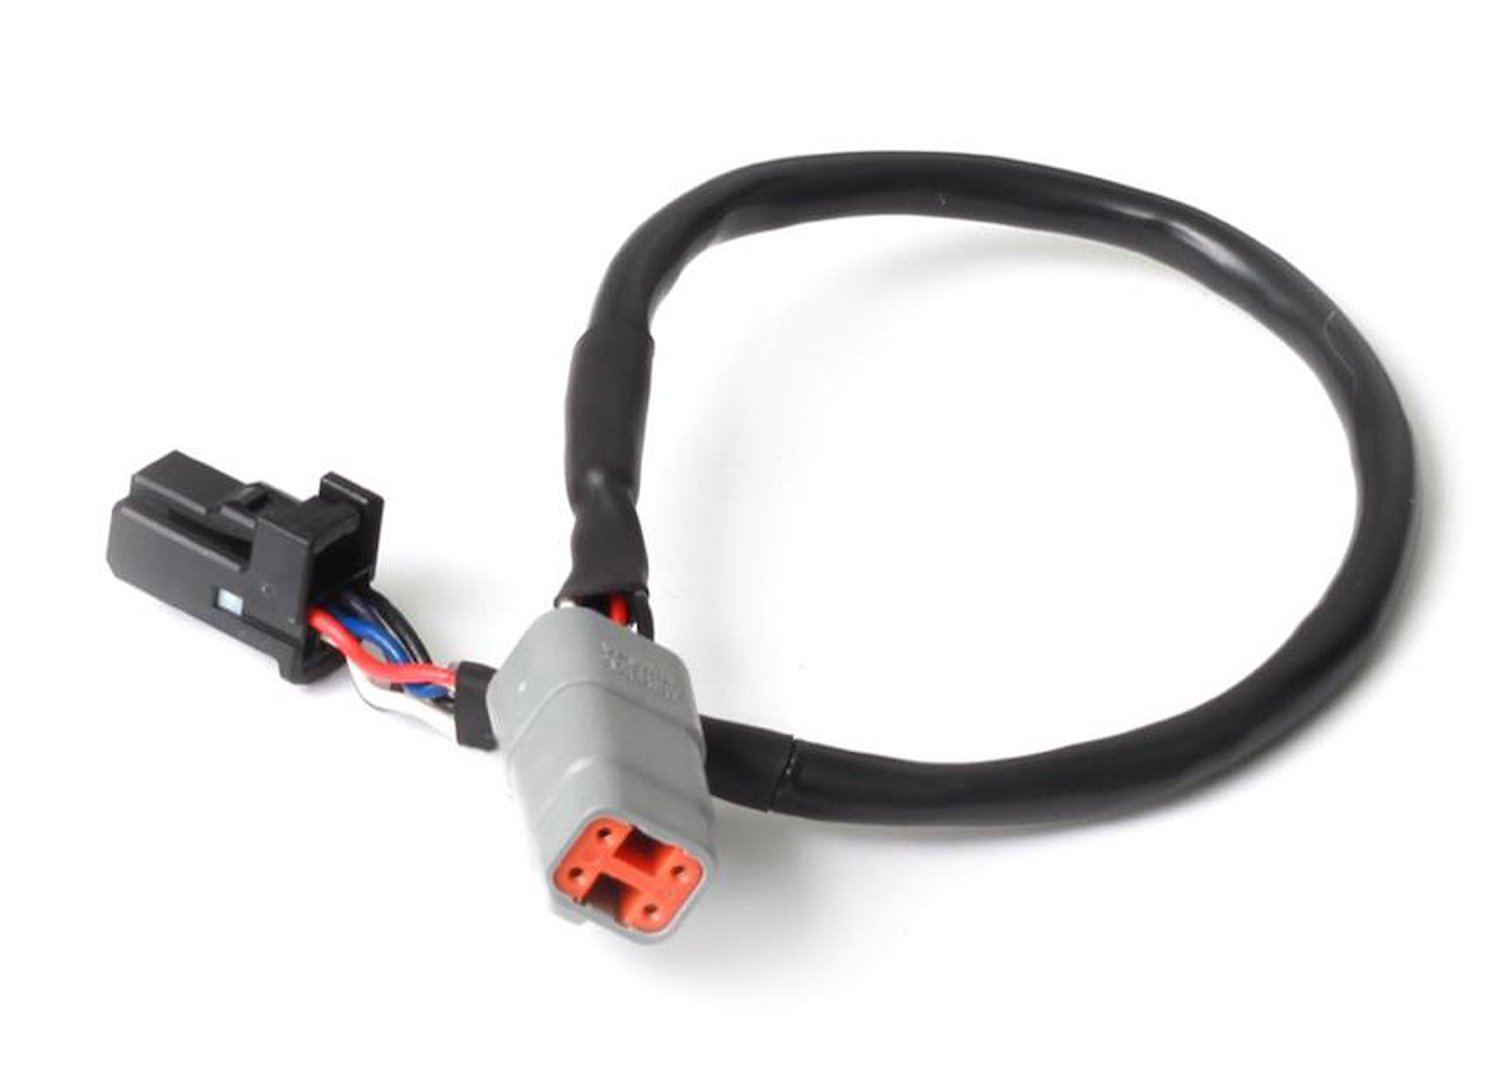 HT-130032 Elite CAN Cable, DTM-4, 8-Pin Black Tyco, 300 mm (12 in.)